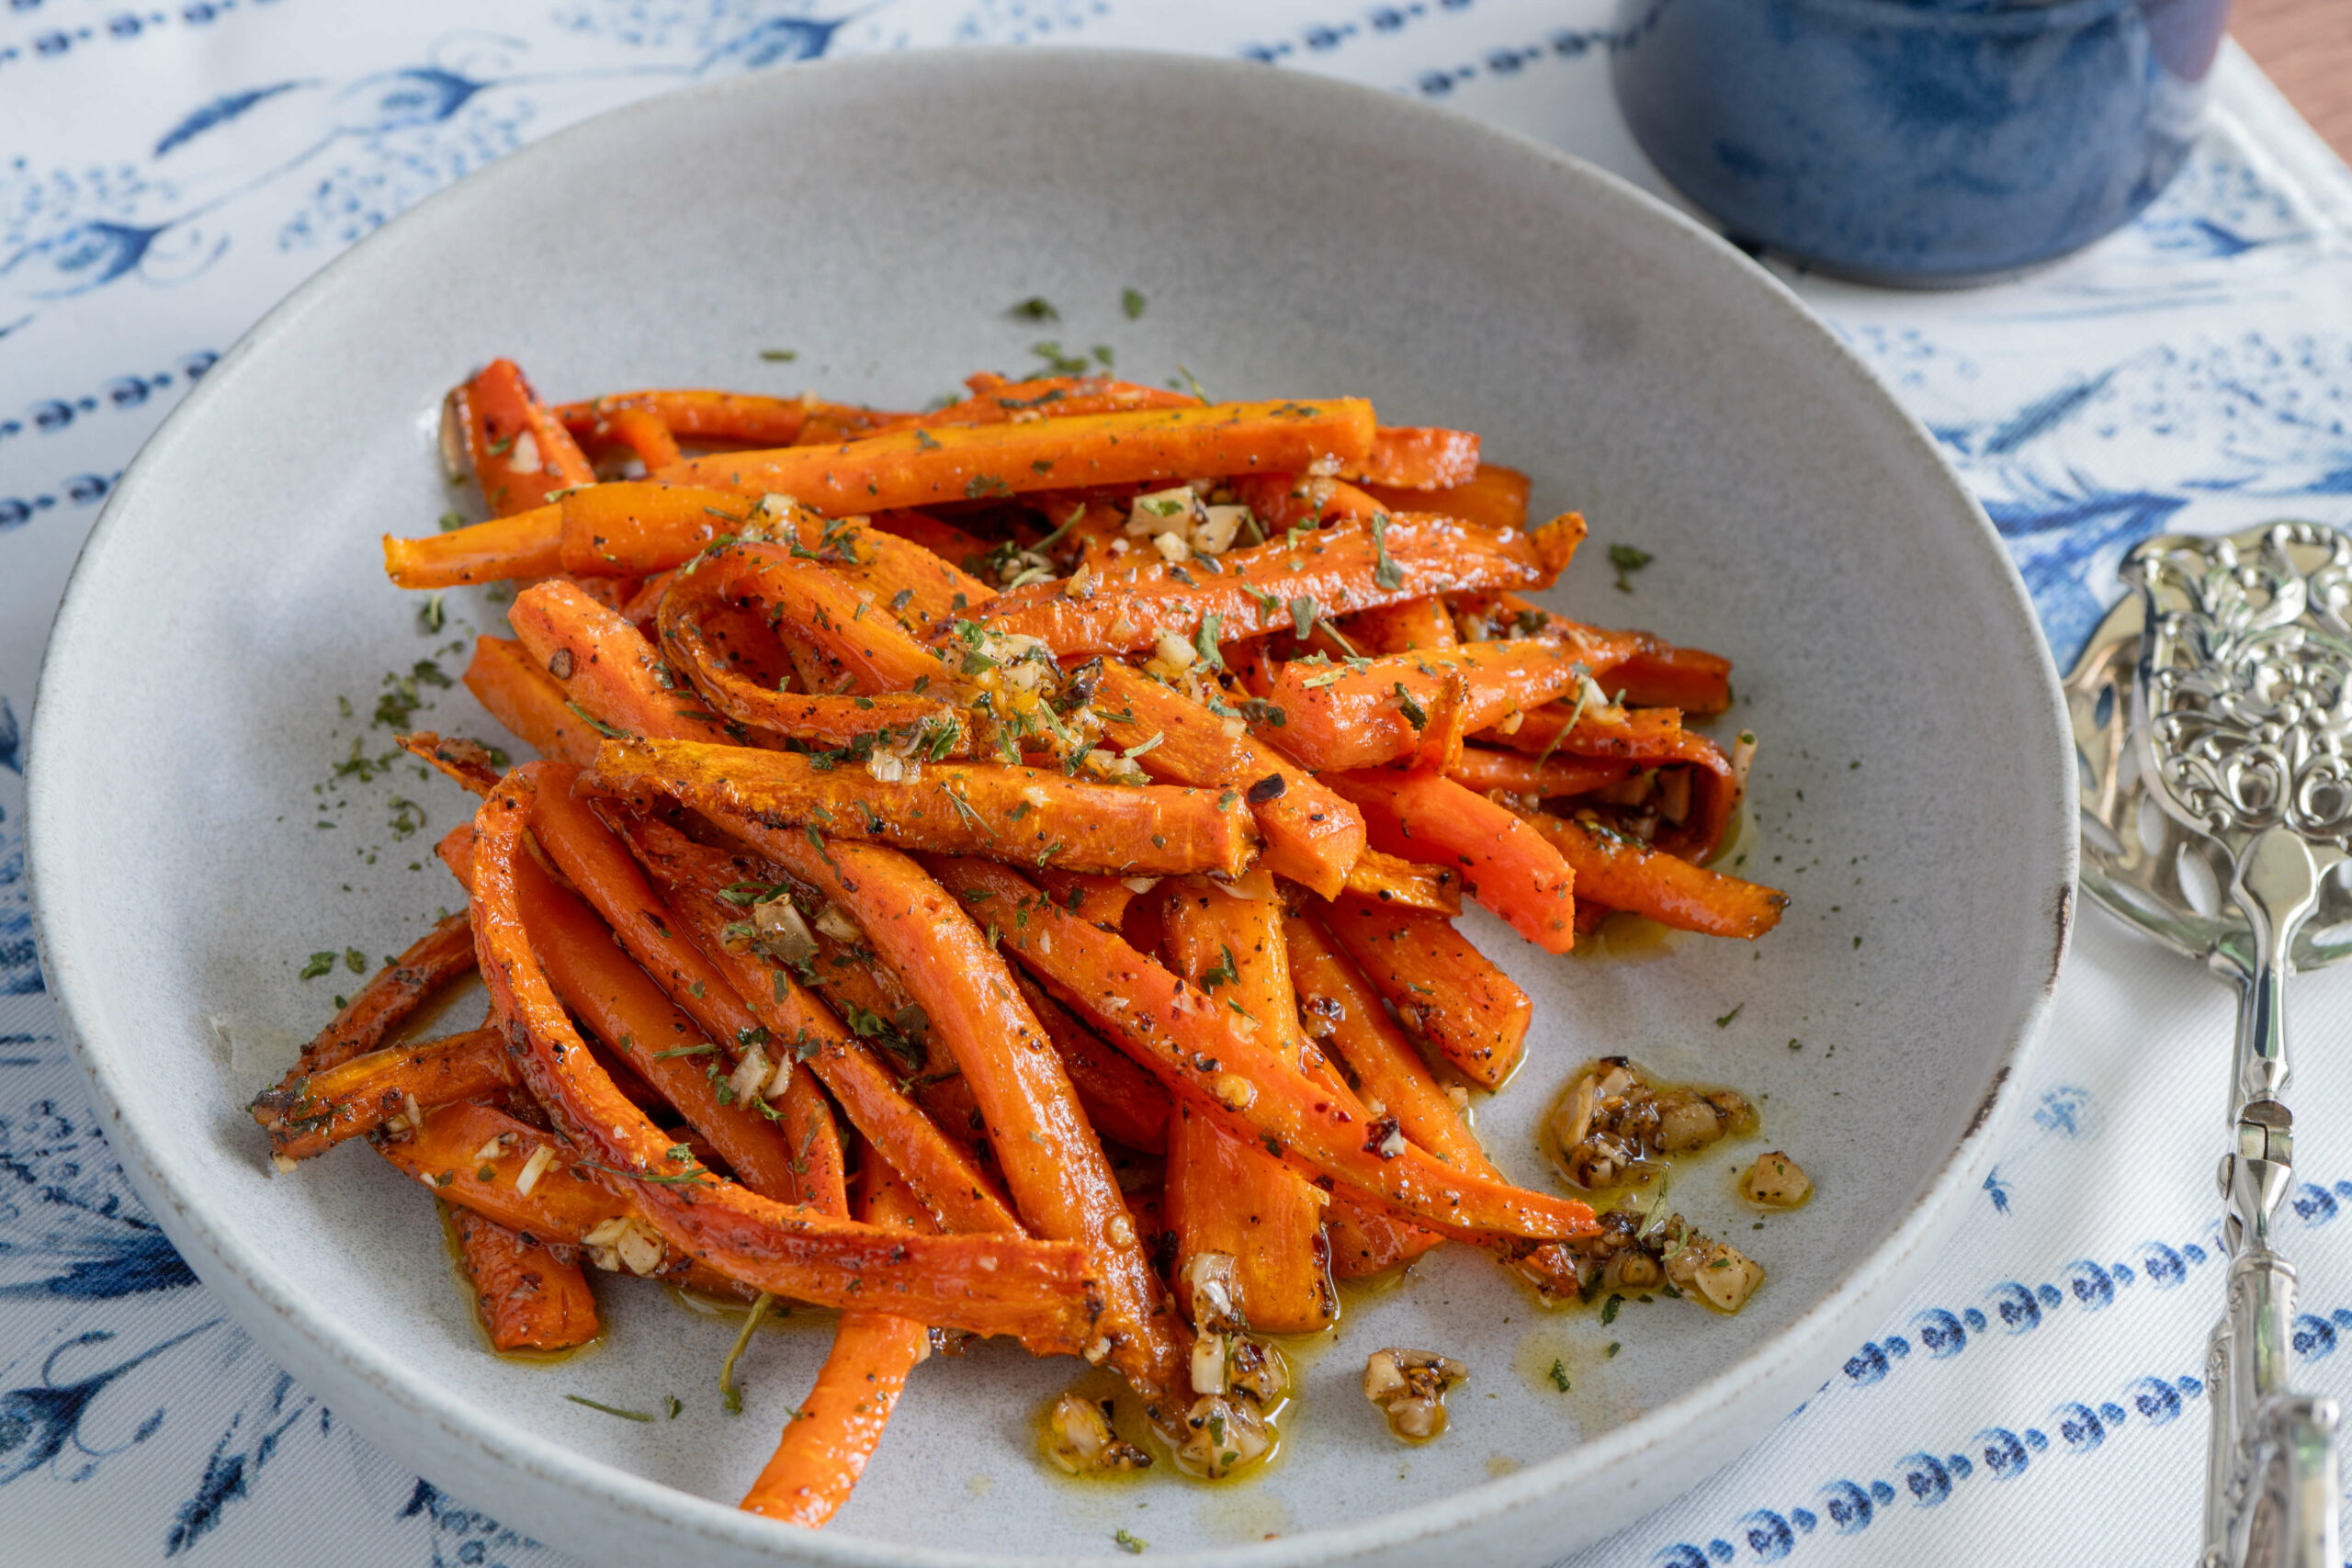 Black Pepper Roasted Carrots served and ready to eat